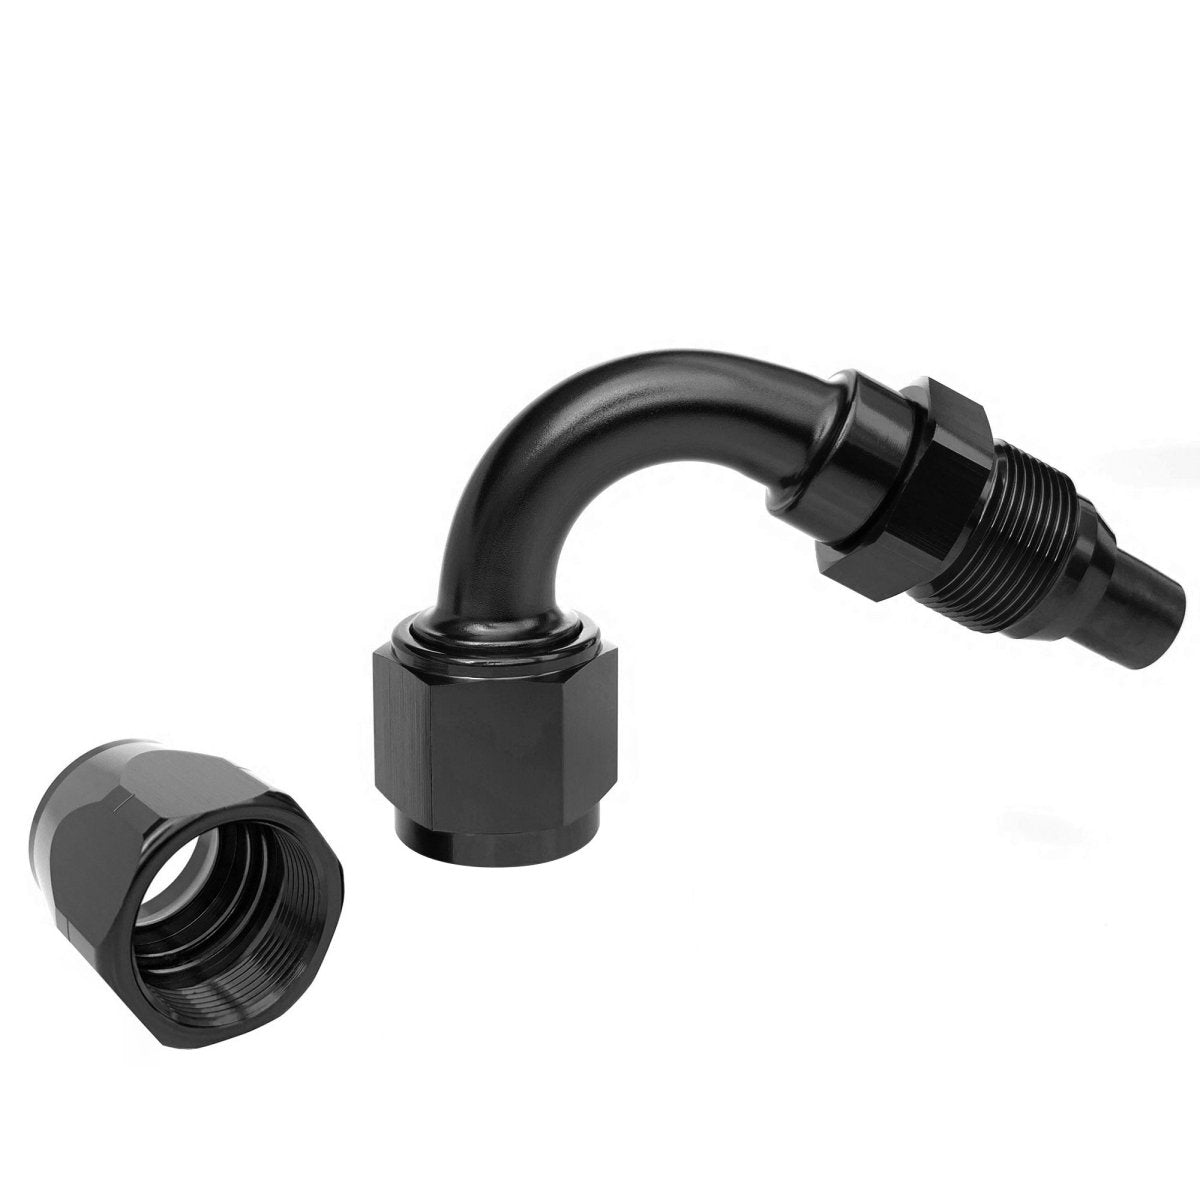 120° Braided Hose Fitting - 812004BK by AN3 Parts